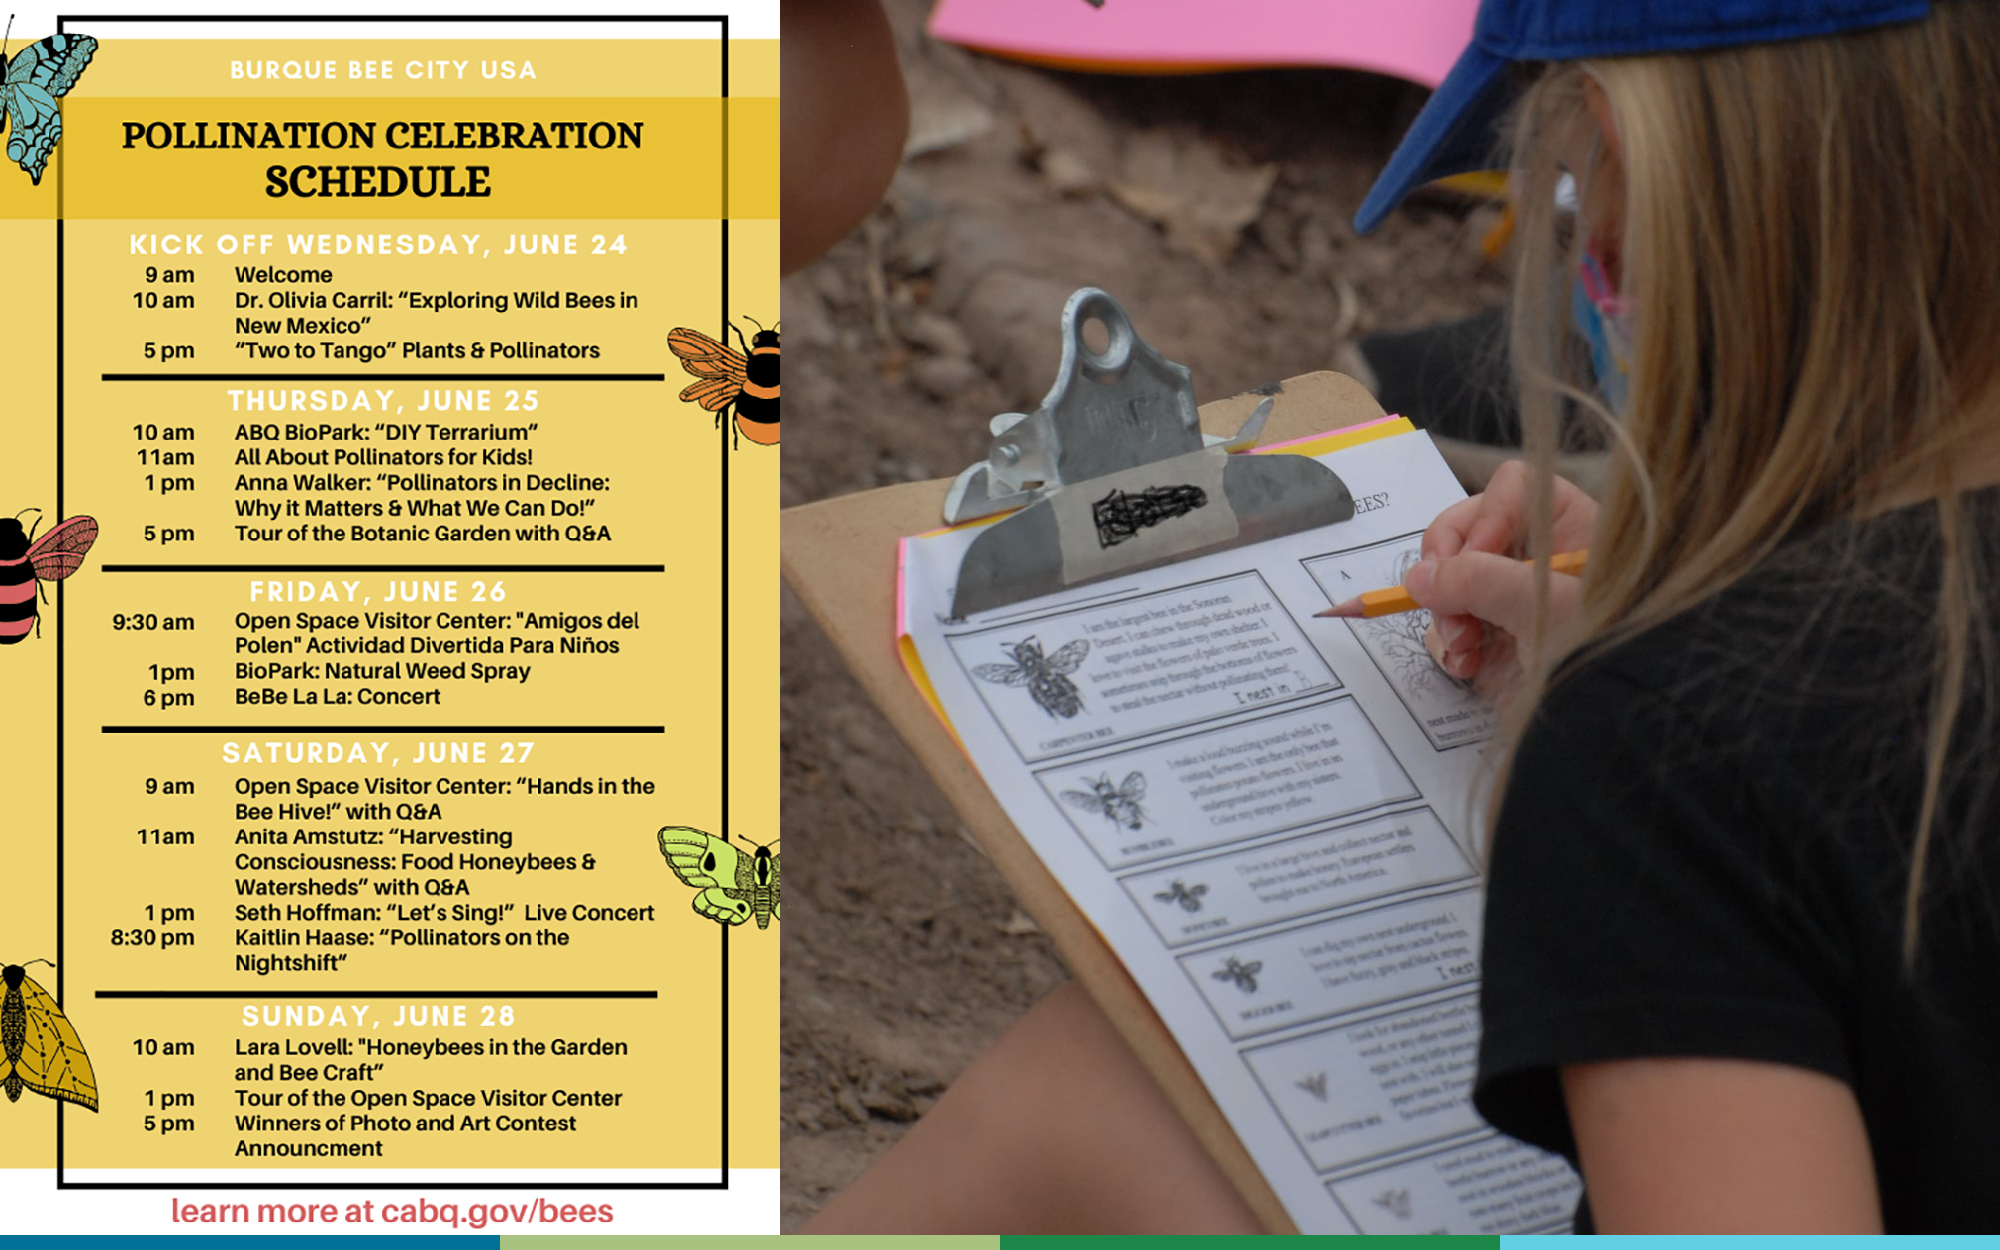 A composite image: On the left is a list of events at a pollinator festival; they are printed in black on pale yellow. On the right, a girl wearing a blue cap sits writing information on a clipboard